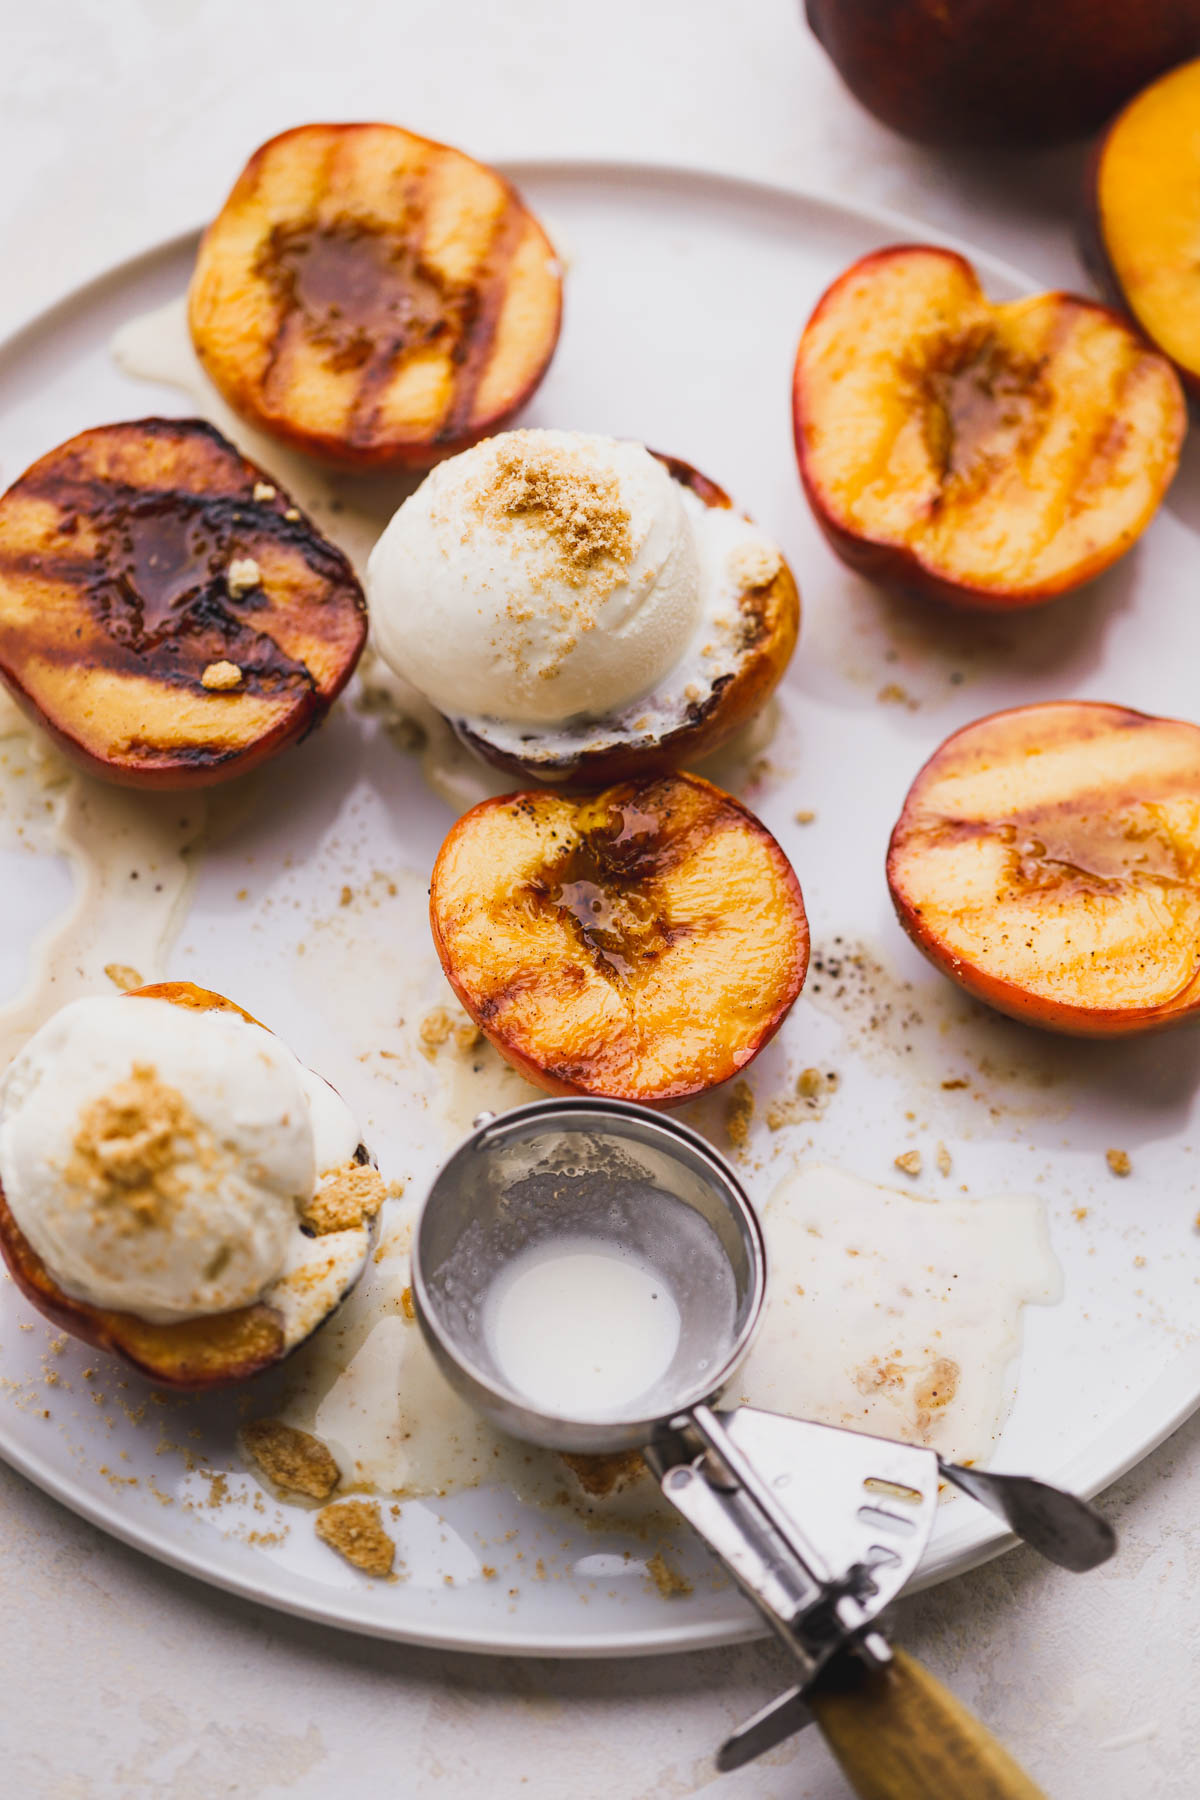 Caramelized peaches with brown butter and vanilla ice cream.